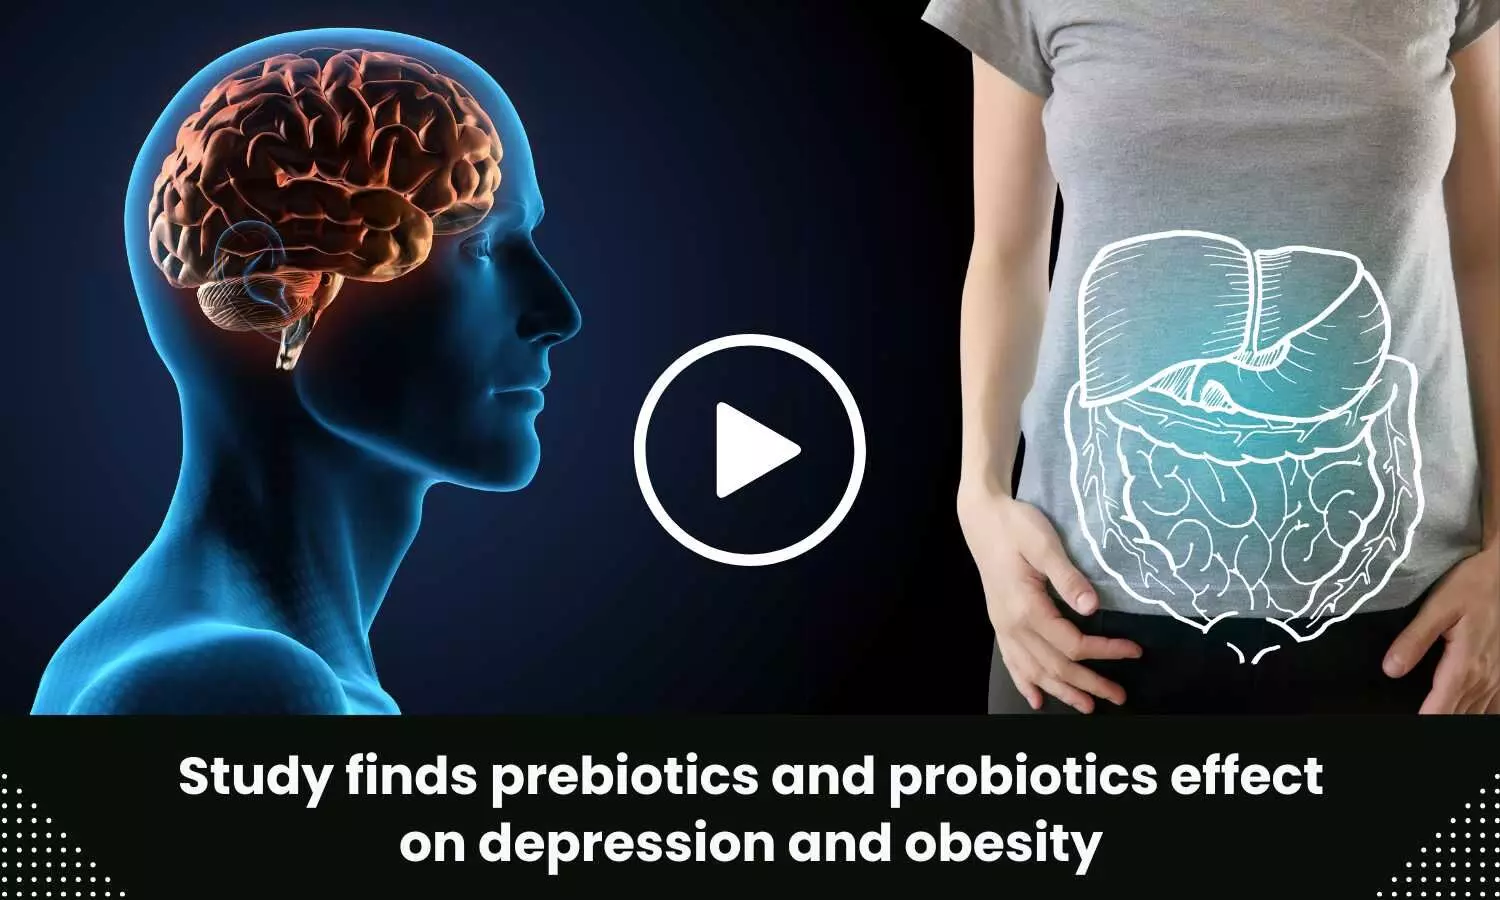 Study finds prebiotics and probiotics effect on depression and obesity